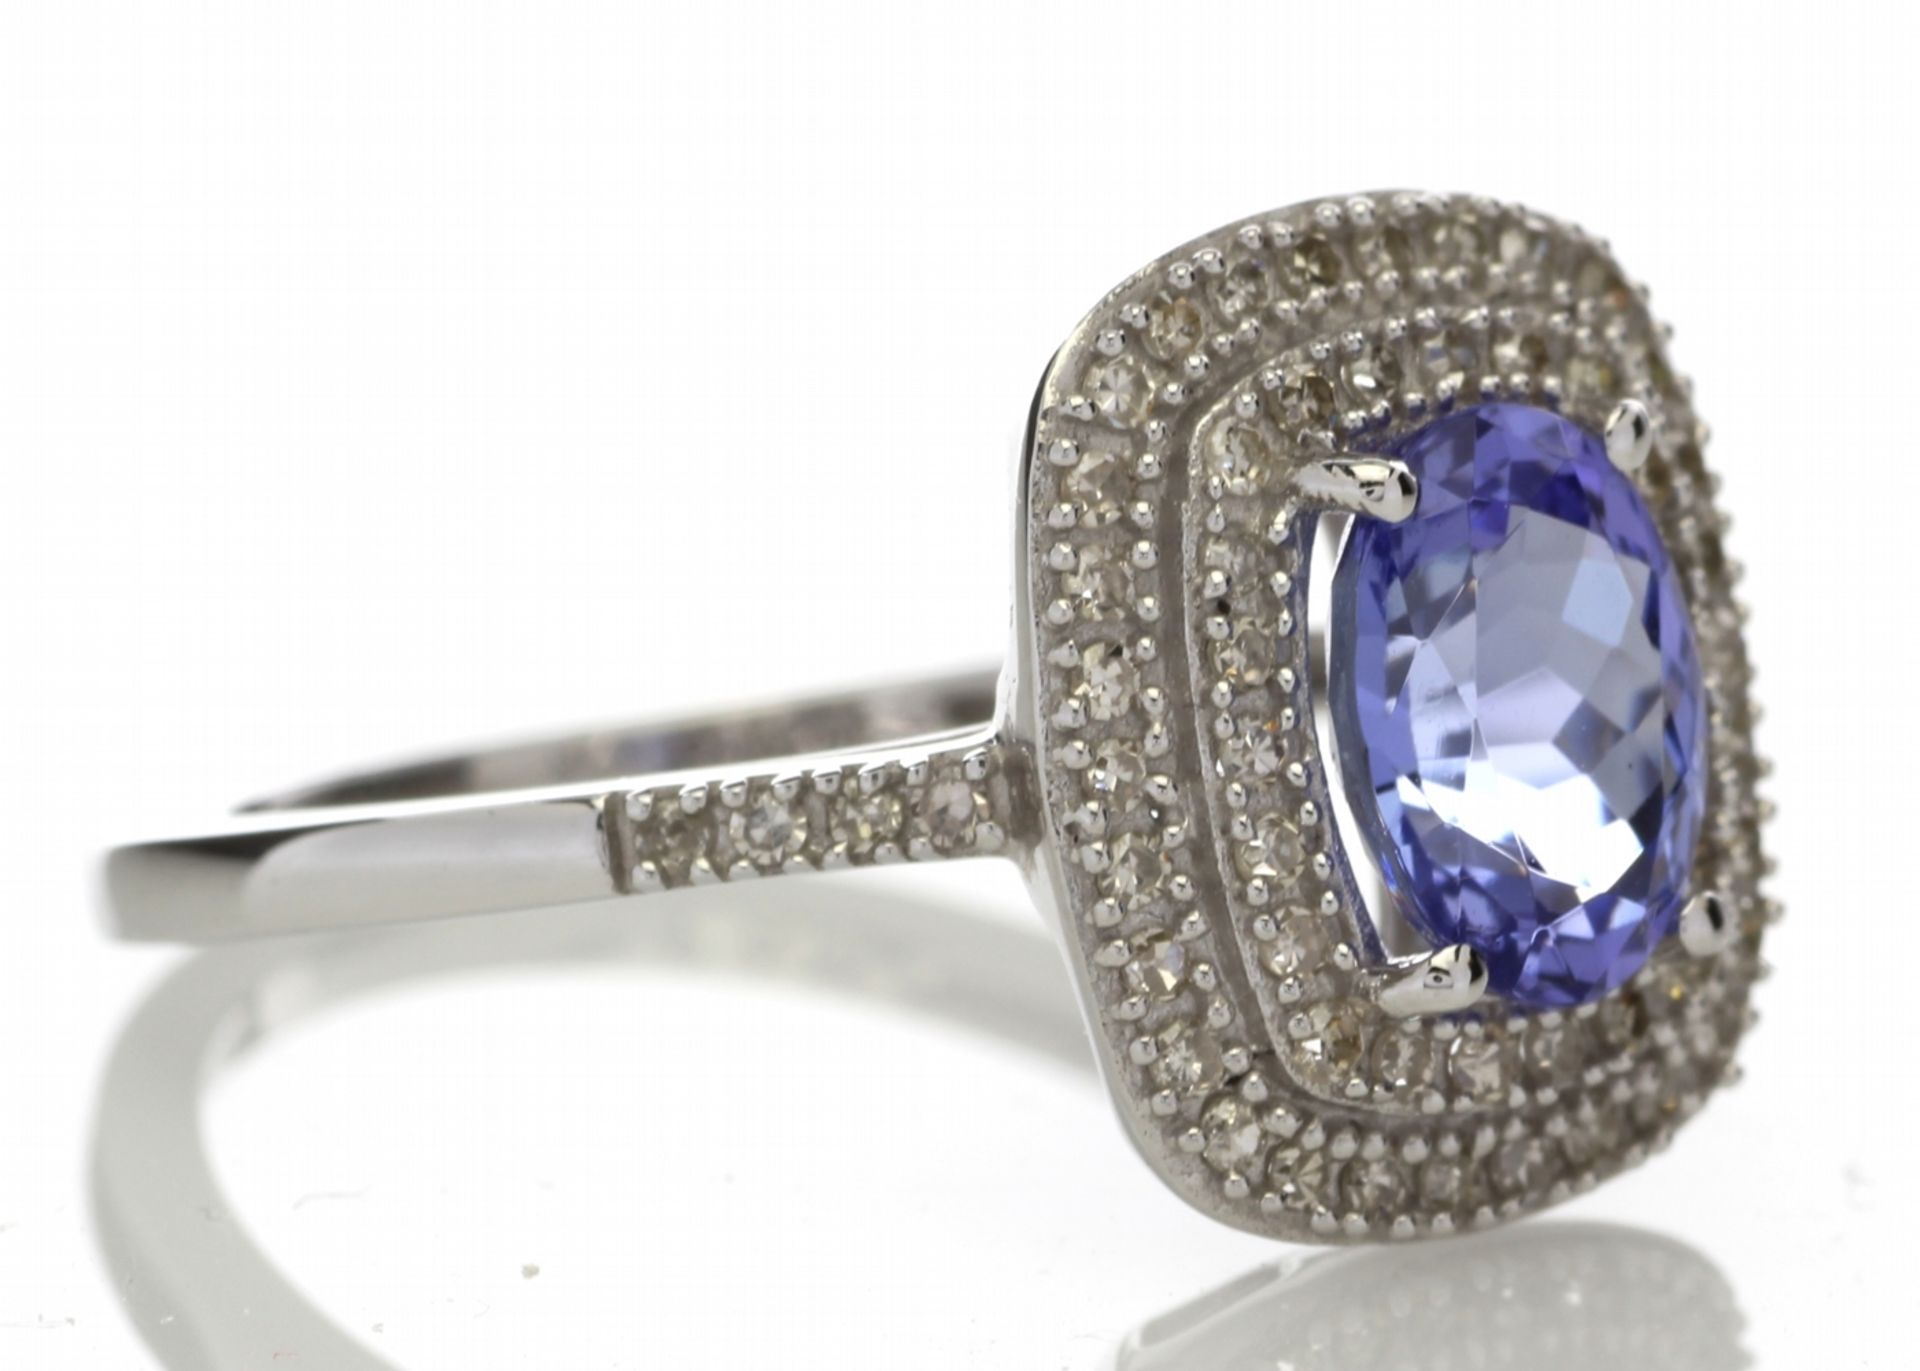 9ct Gold Oval Tanzanite And Diamond Cluster Ring 0.33 Carats - Valued by GIE £3,620.00 - 9ct Gold - Image 4 of 5